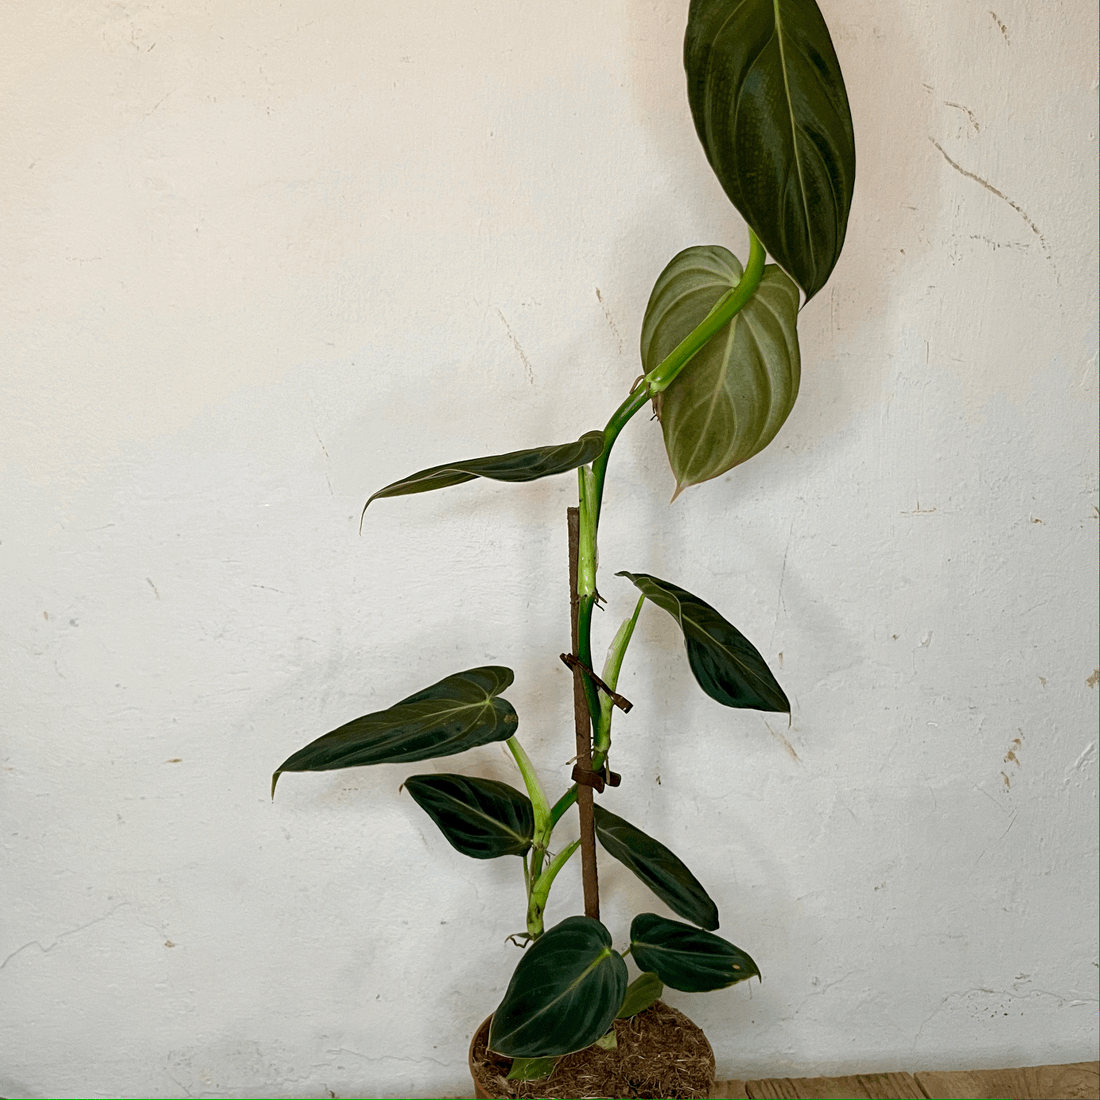 Philodendron melanochrysum (Black-gold Philodendron)